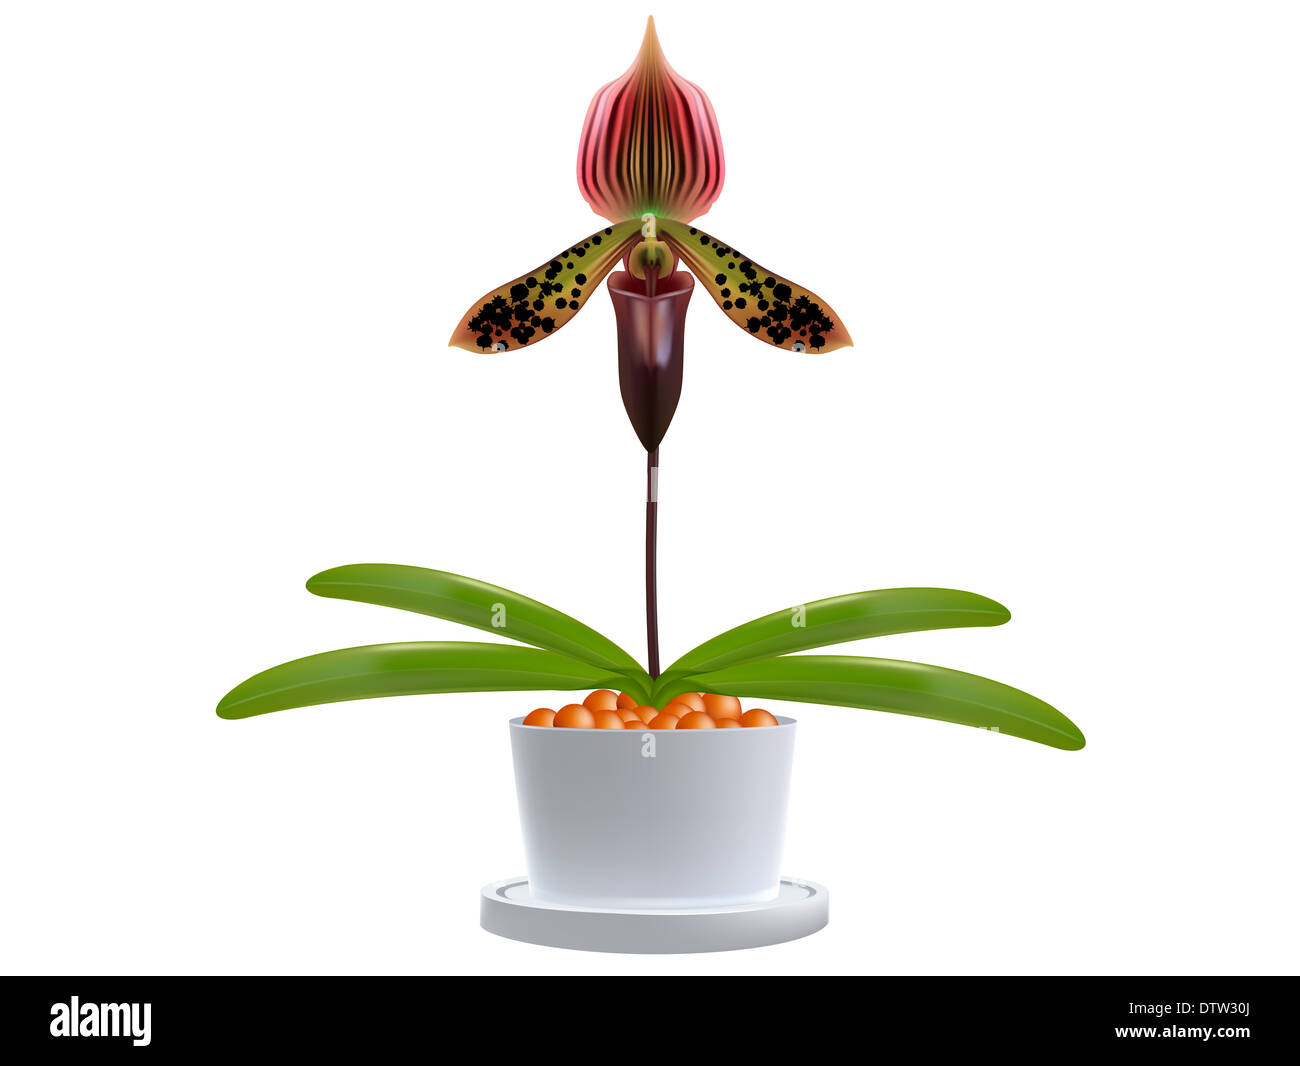 Lady's slipper orchid. Paphiopedilum Callosum Isolated on a white background. Stock Photo